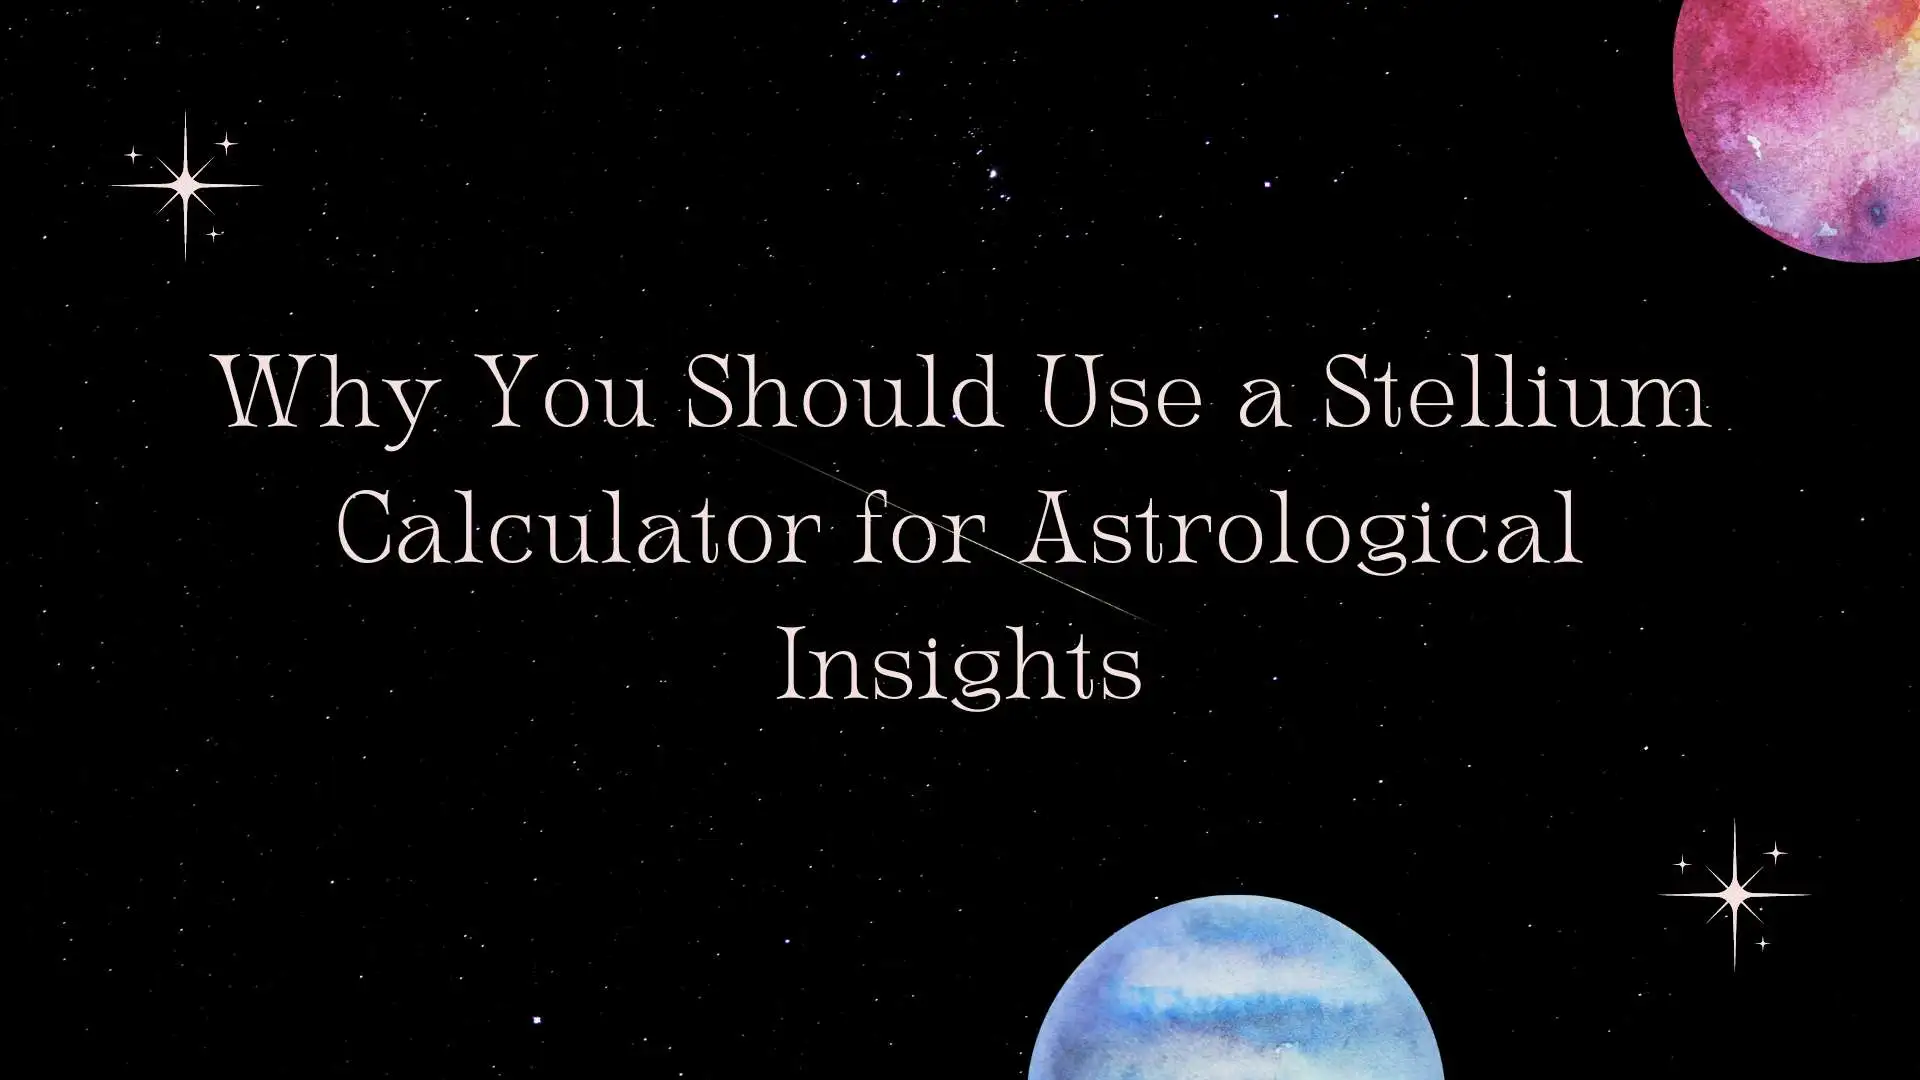 Why You Should Use a Stellium Calculator for Astrological Insights